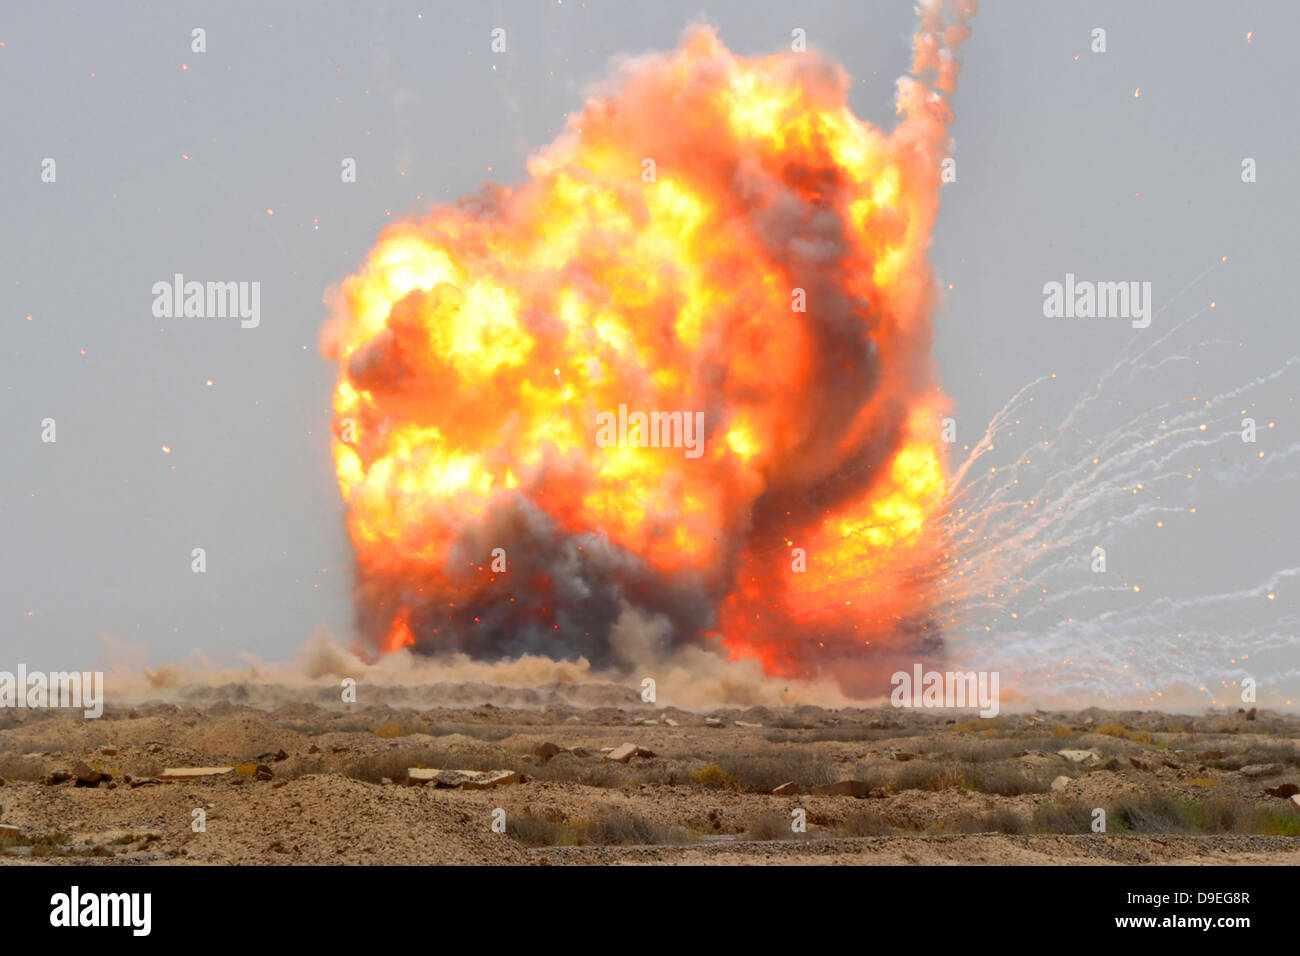 A controlled detonation is set off to destroy unexploded ordnance outside Bassami, Iraq. Stock Photo